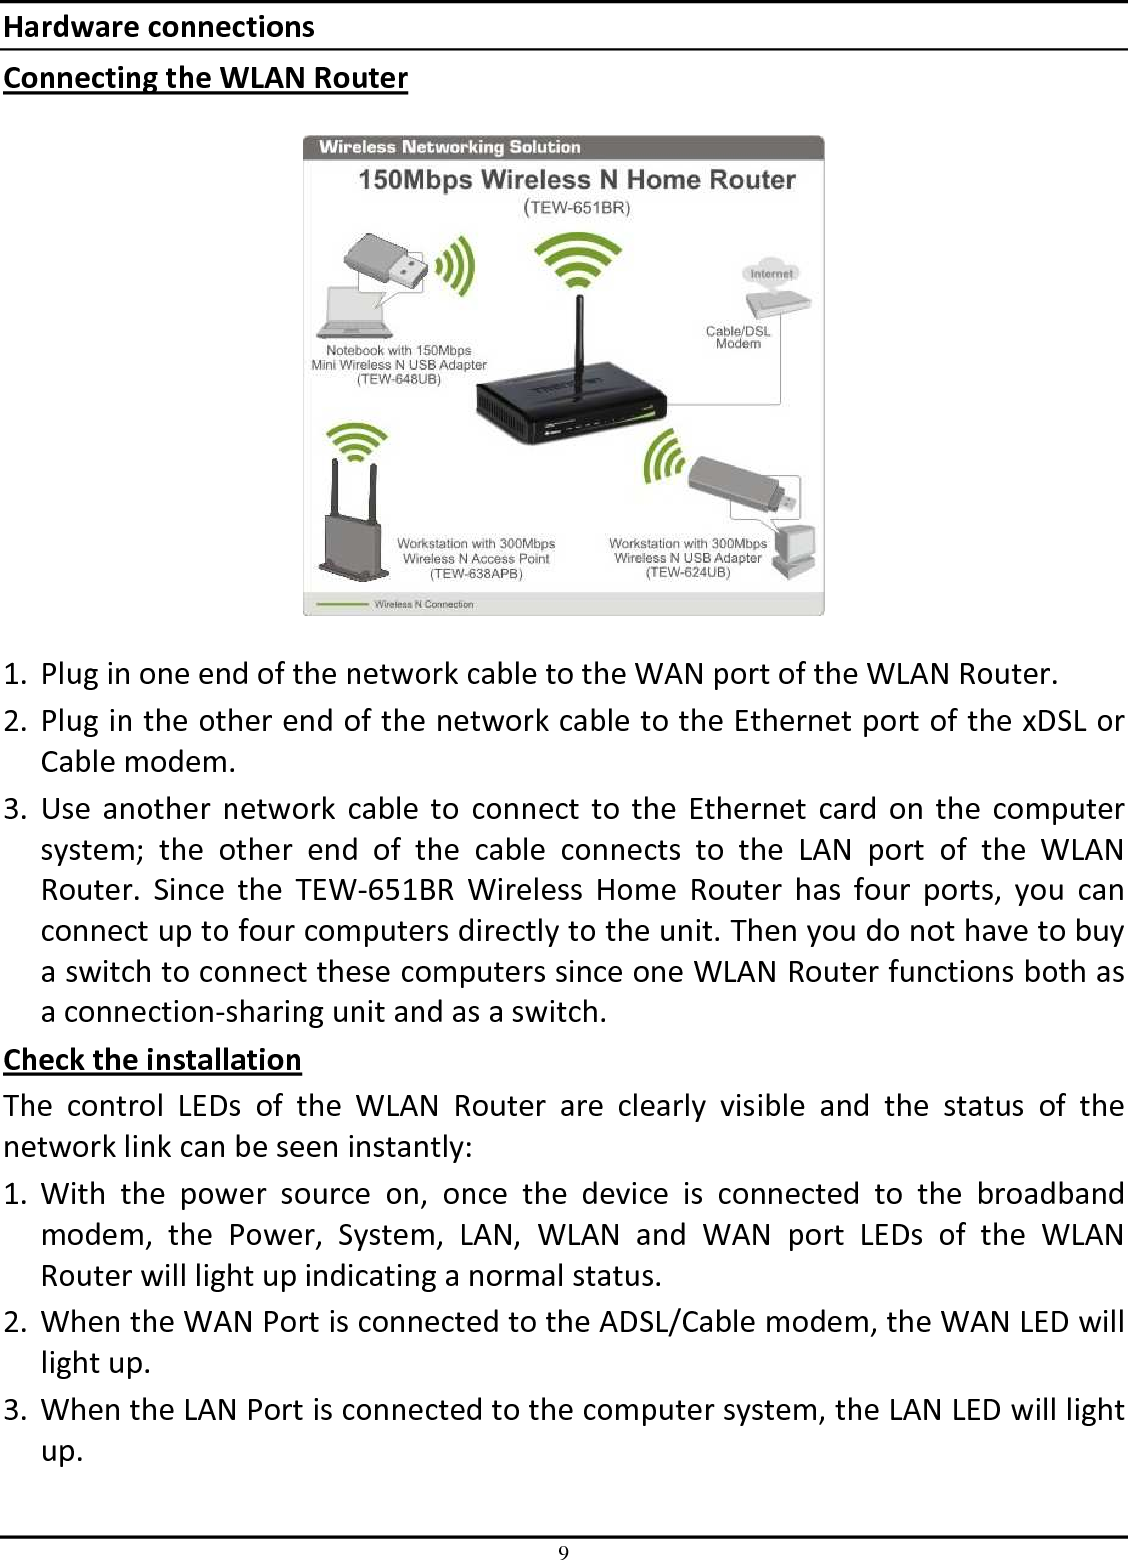 9 Hardware connections Connecting the WLAN Router    1. Plug in one end of the network cable to the WAN port of the WLAN Router. 2. Plug in the other end of the network cable to the Ethernet port of the xDSL or Cable modem. 3. Use another network cable to  connect to the Ethernet card on  the computer system;  the  other  end  of  the  cable  connects  to  the  LAN  port  of  the  WLAN Router.  Since  the  TEW-651BR  Wireless  Home  Router  has  four  ports,  you  can connect up to four computers directly to the unit. Then you do not have to buy a switch to connect these computers since one WLAN Router functions both as a connection-sharing unit and as a switch. Check the installation The  control  LEDs  of  the  WLAN  Router  are  clearly  visible  and  the  status  of  the network link can be seen instantly: 1. With  the  power  source  on,  once  the  device  is  connected  to  the  broadband modem,  the  Power,  System,  LAN,  WLAN  and  WAN  port  LEDs  of  the  WLAN Router will light up indicating a normal status. 2. When the WAN Port is connected to the ADSL/Cable modem, the WAN LED will light up. 3. When the LAN Port is connected to the computer system, the LAN LED will light up. 